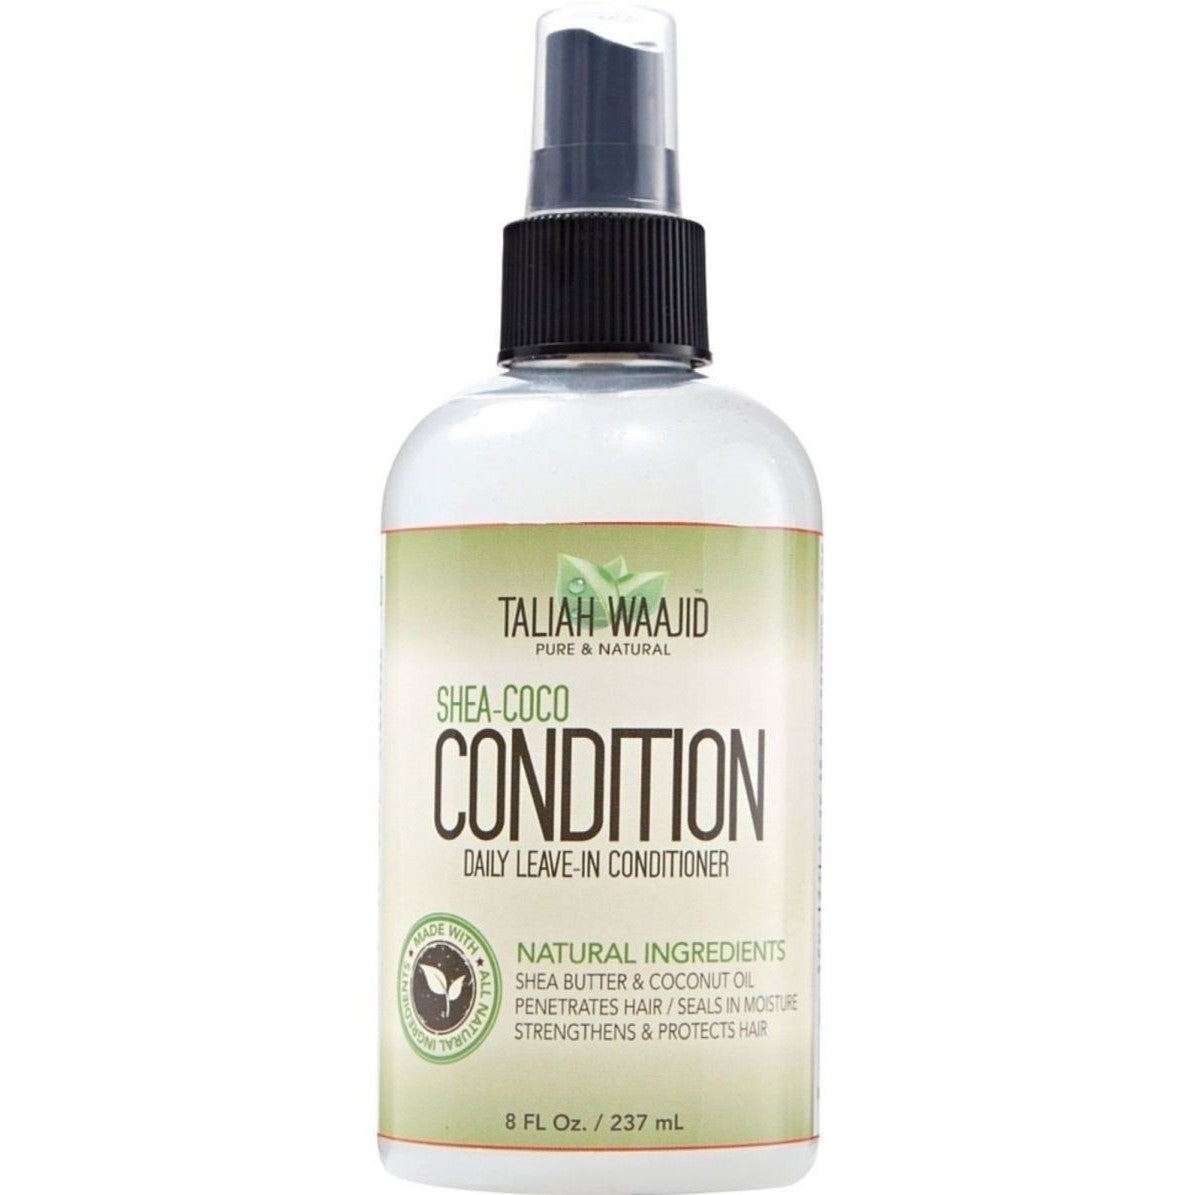 Taliah Waajid Shea Coco Condition Daily Leave in Conditioner Spray 236ml